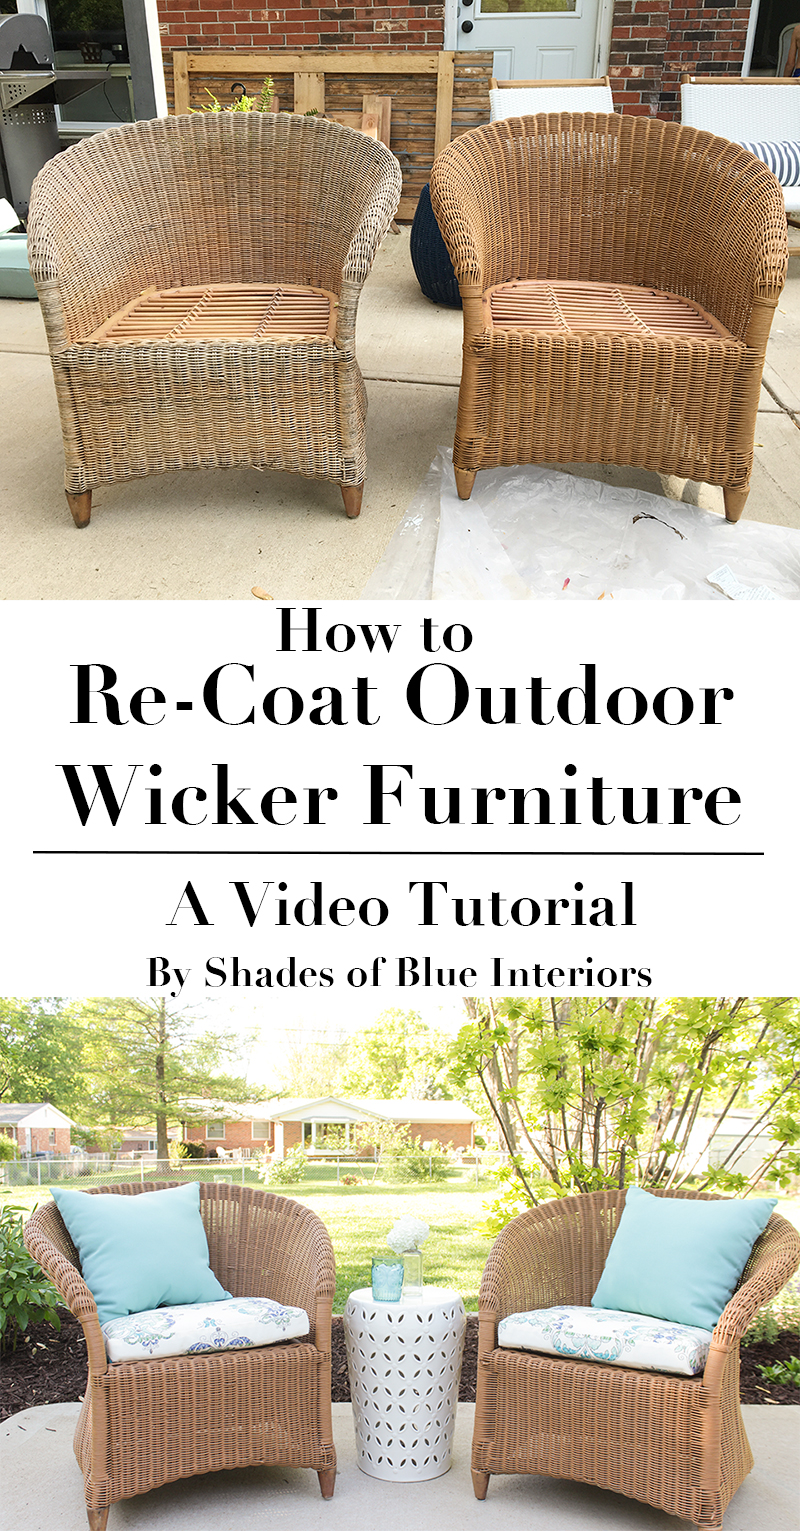 How To Re Coat Wicker Furniture, What Spray Paint To Use For Wicker Furniture